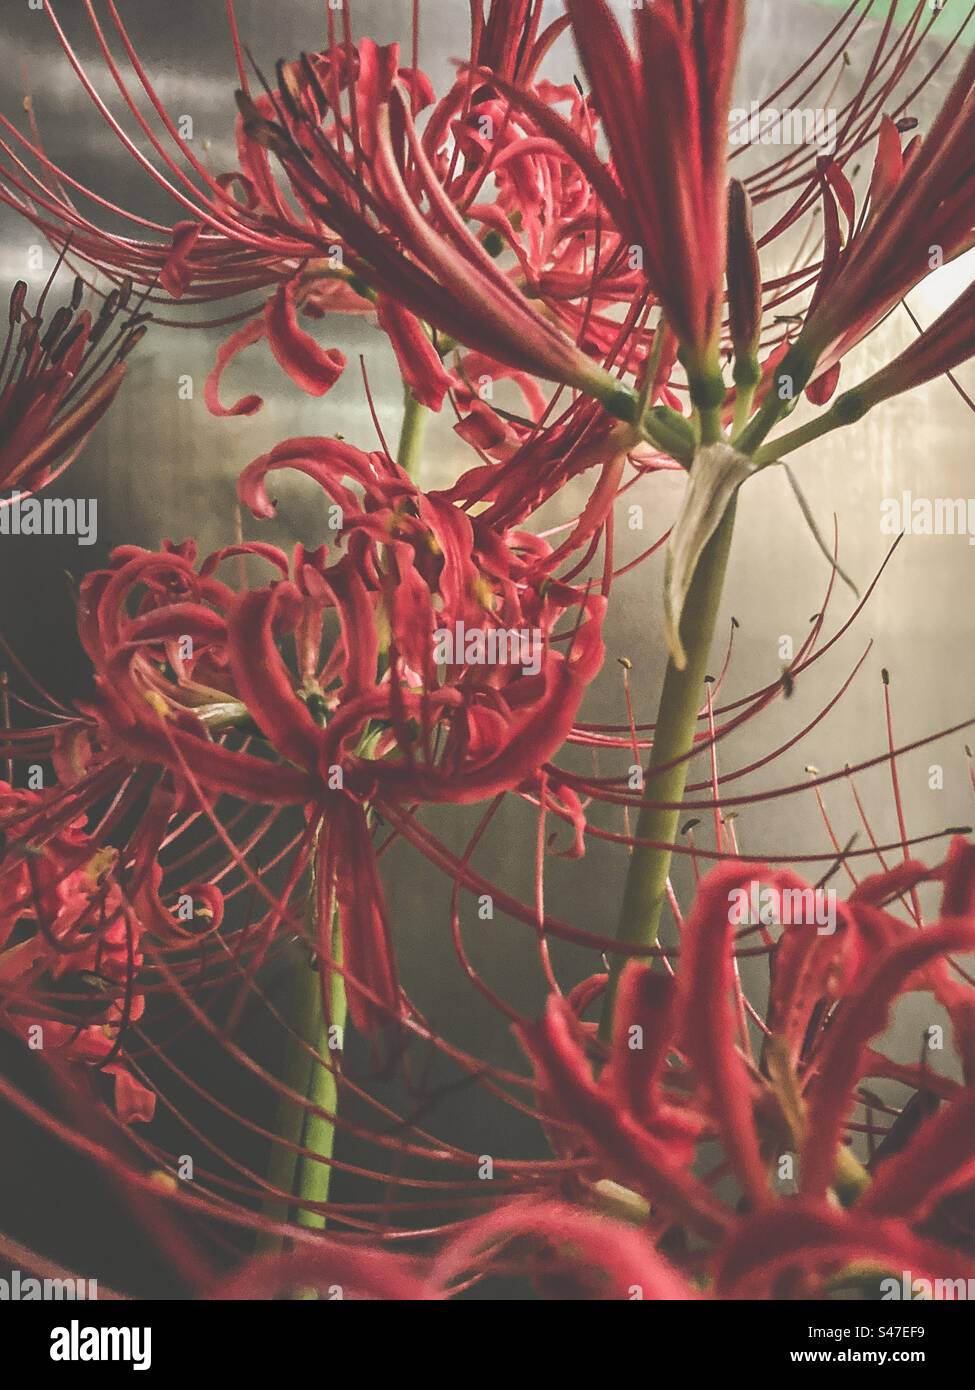 Red spider lilies at nighttime Stock Photo